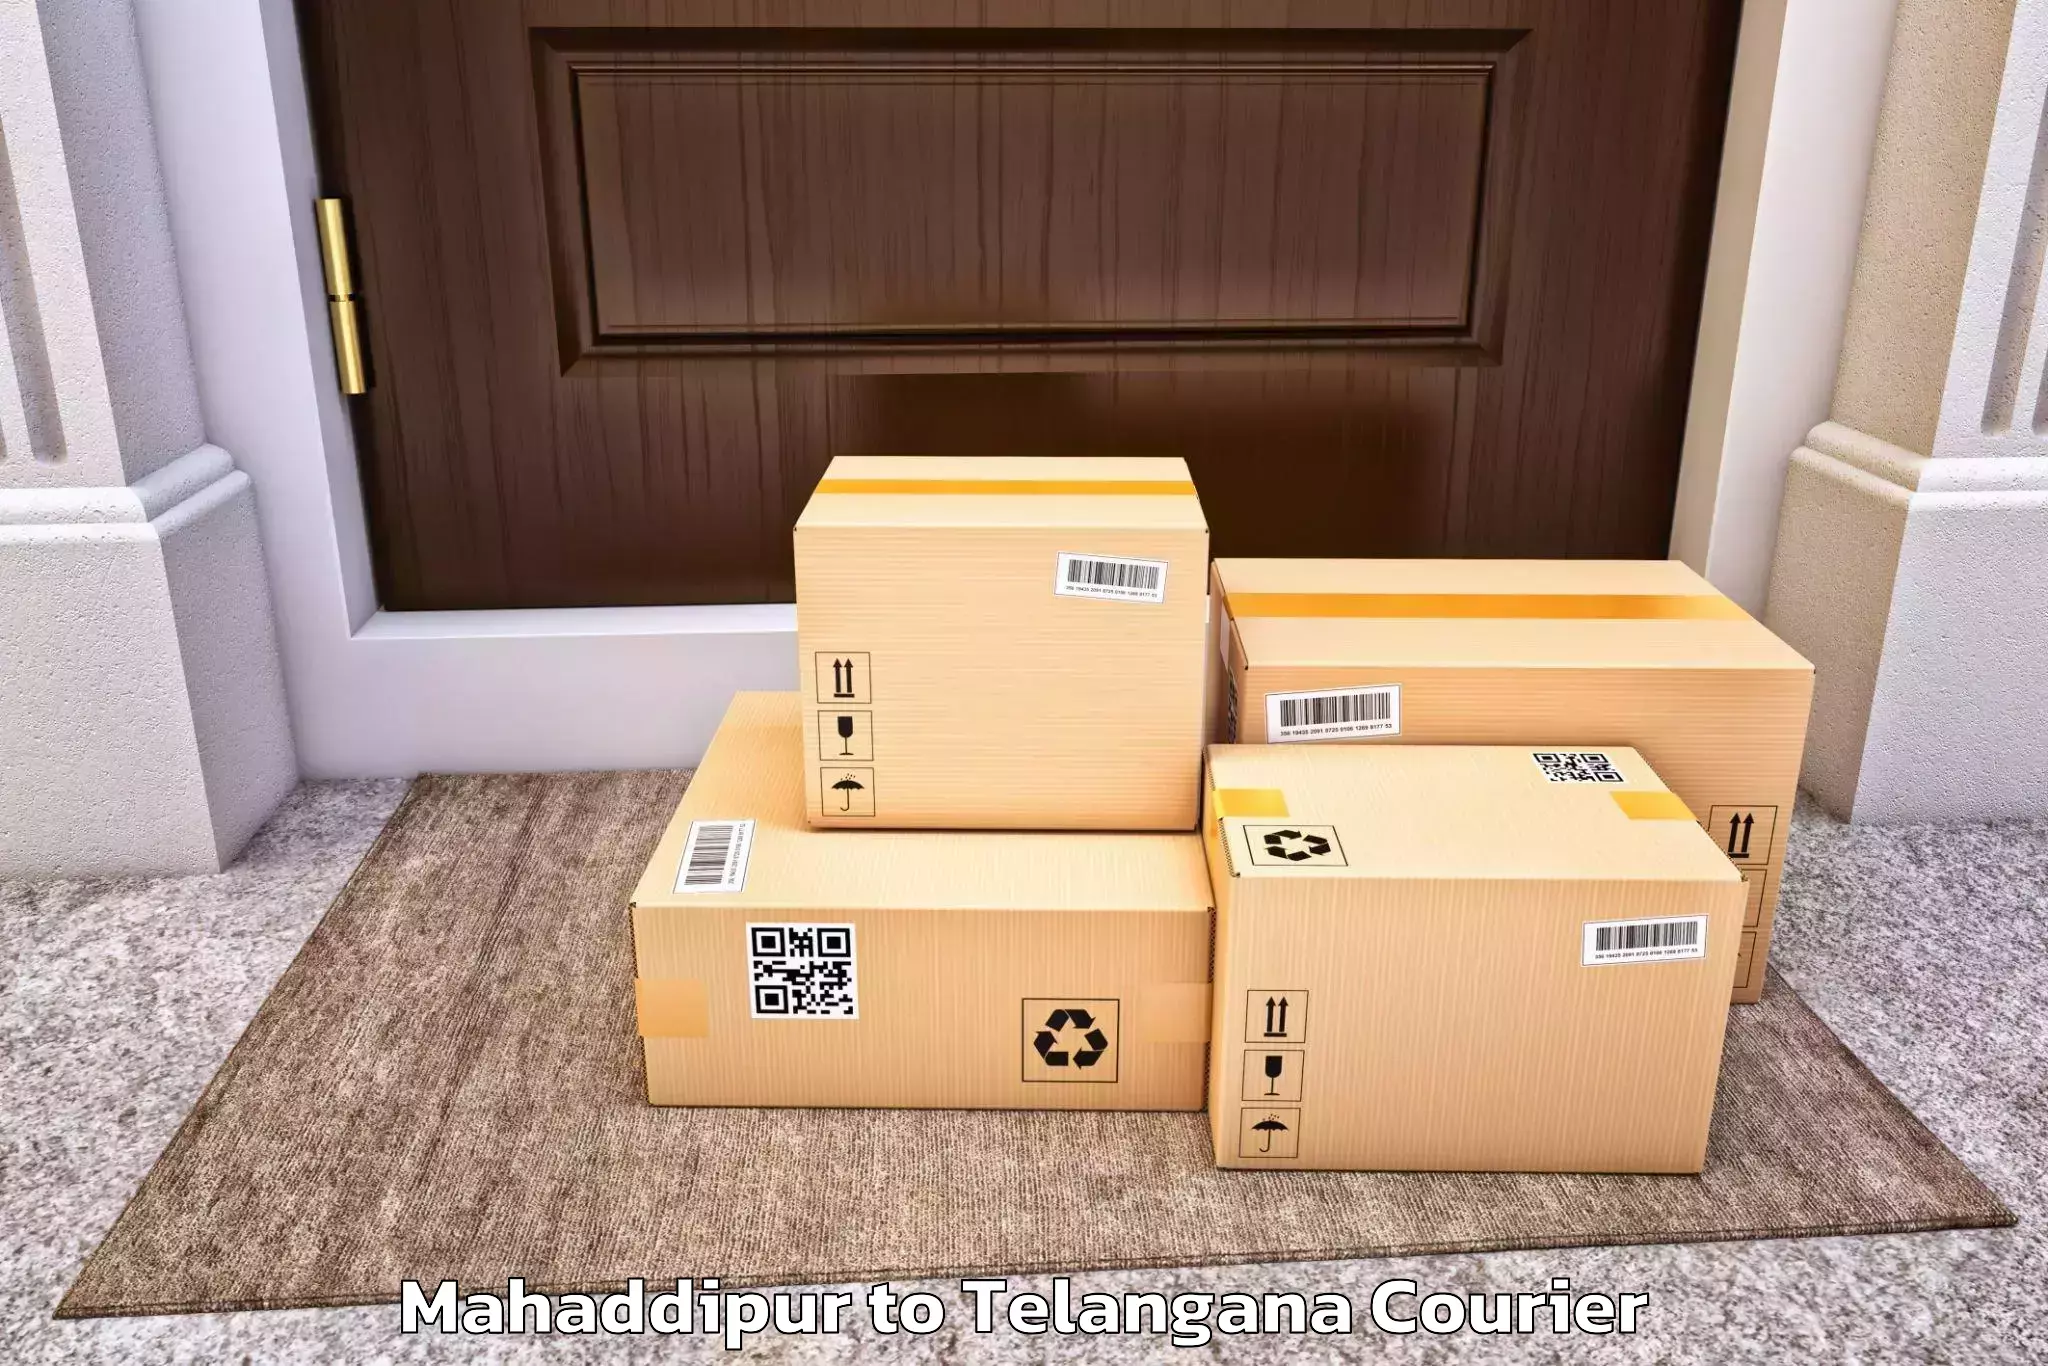 Professional movers in Mahaddipur to Hyderabad